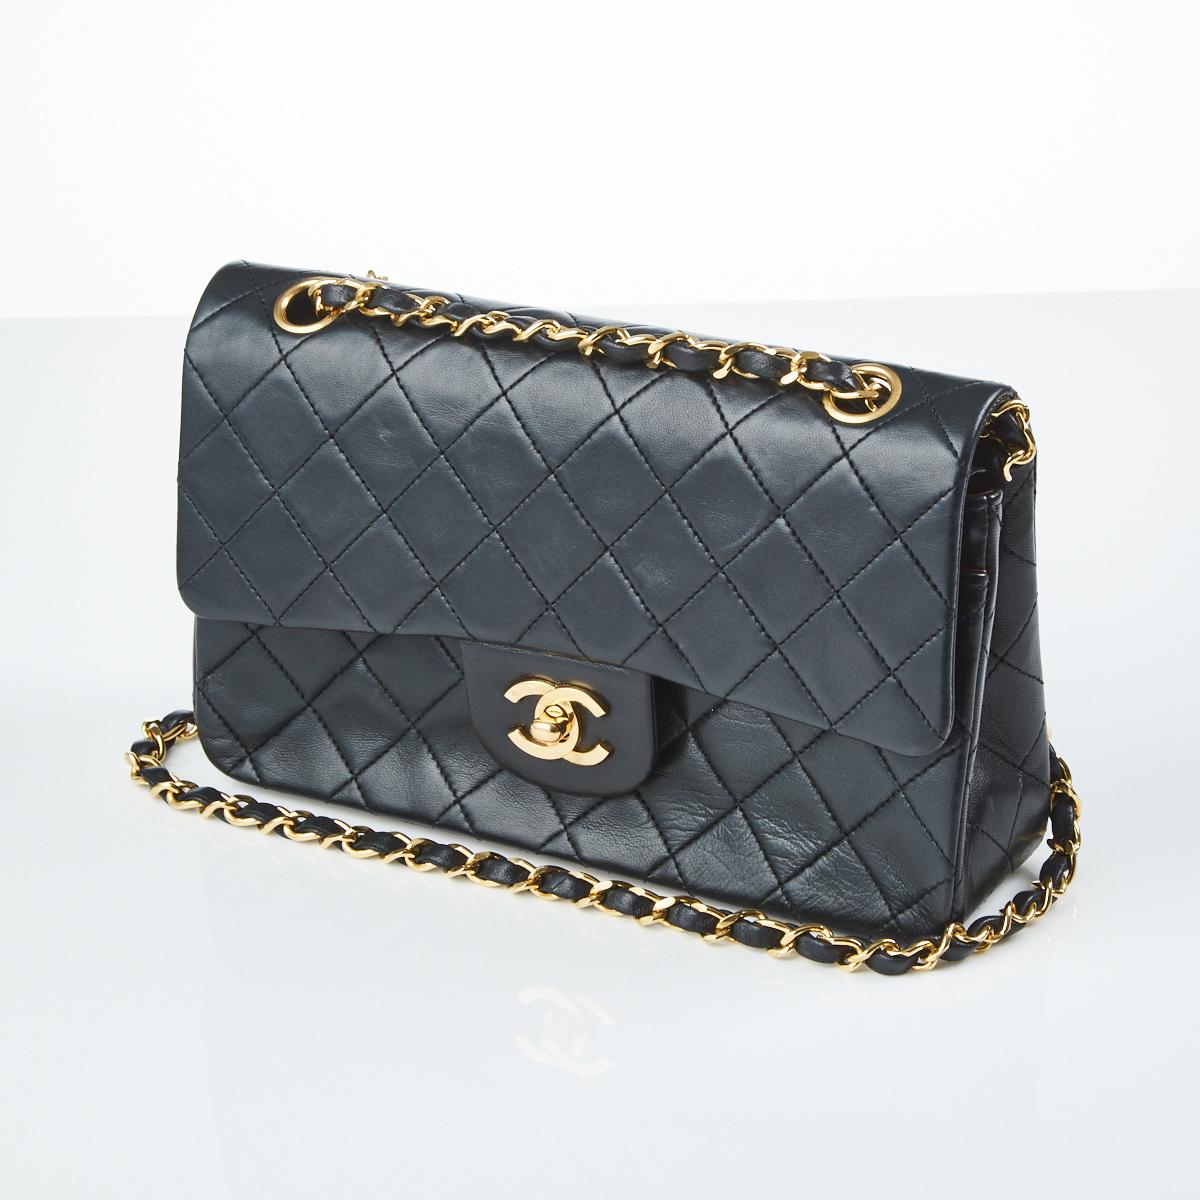 Chanel Airlines Classic Double Flap Bag Quilted Printed Satin Medium